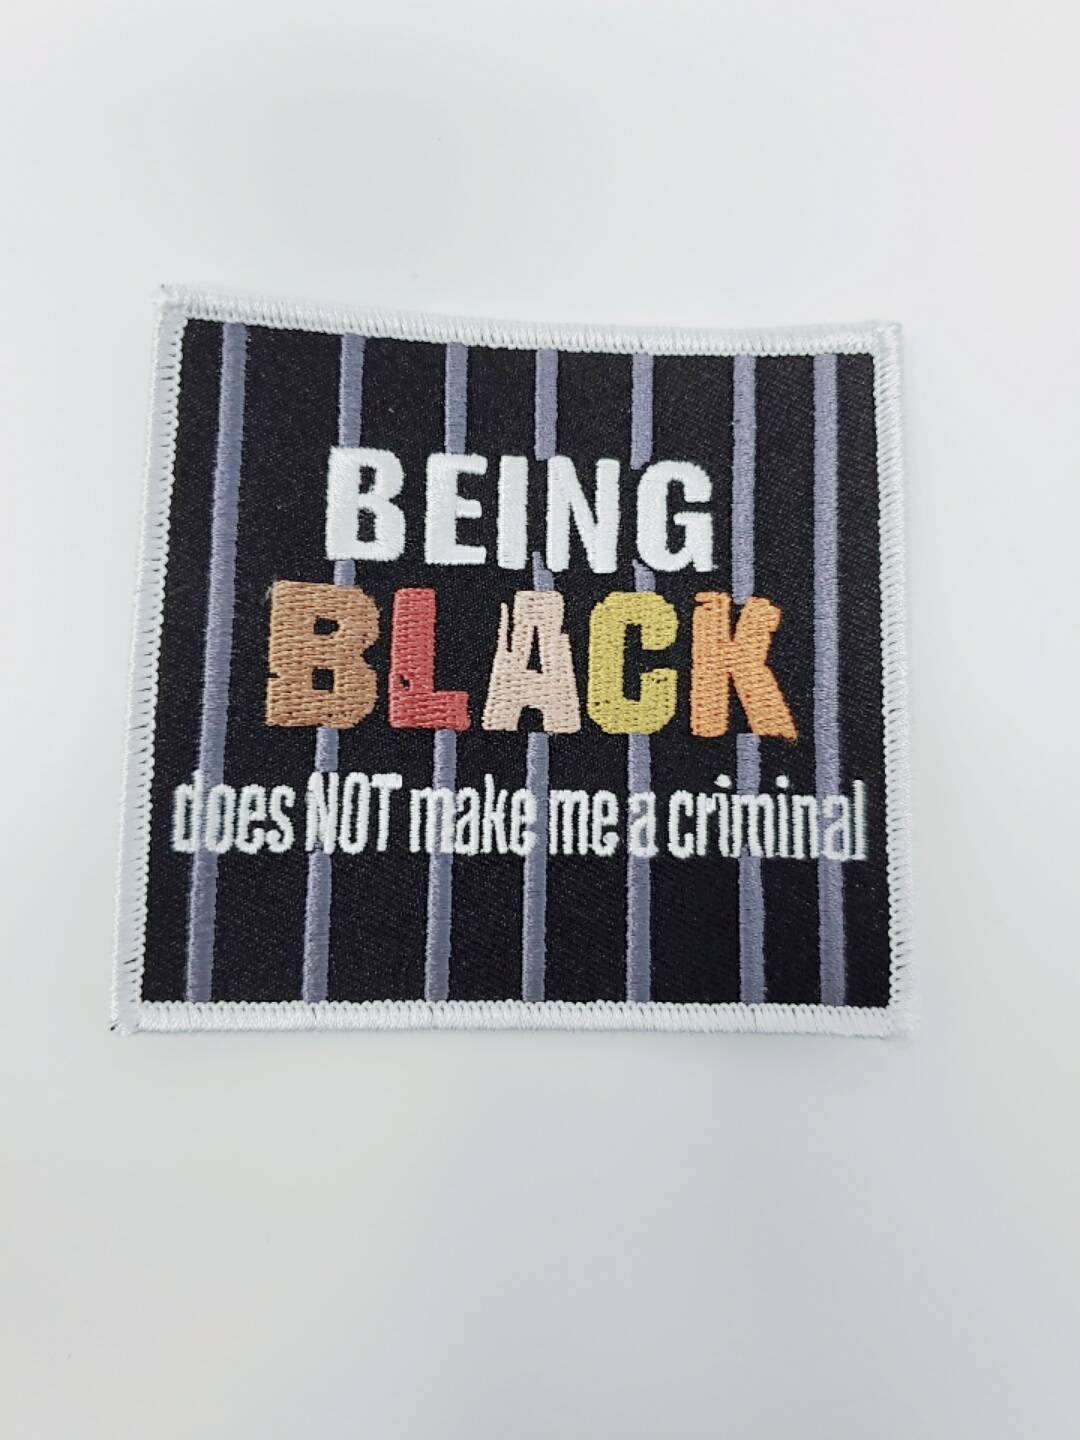 Statement Patch "Being Black..." Iron-On Embroidered Patch; Rights Movement Patch; Cool Patch for Clothing; Men Patches, Size 3.5"x3.5"